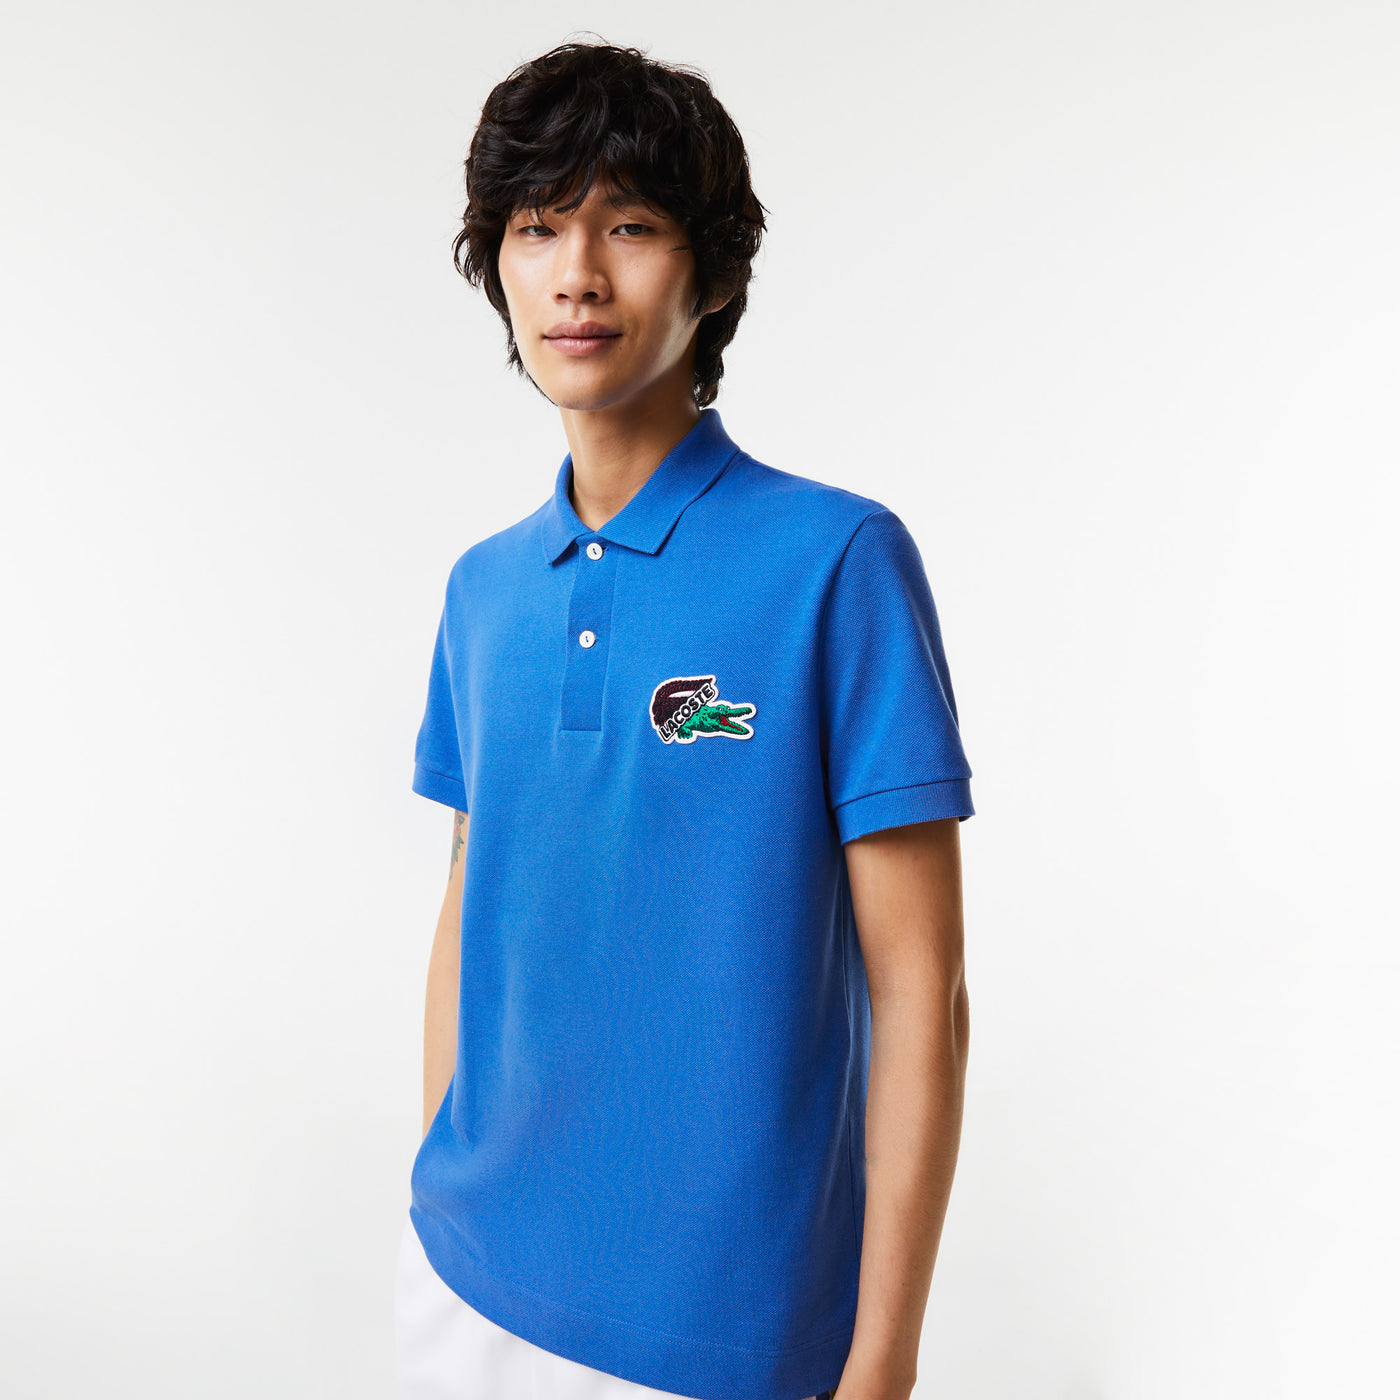 Shop The Latest Collection Of Lacoste Men'S Lacoste Holiday Organic Cotton Piquã© Polo Shirt - Ph1369 In Lebanon